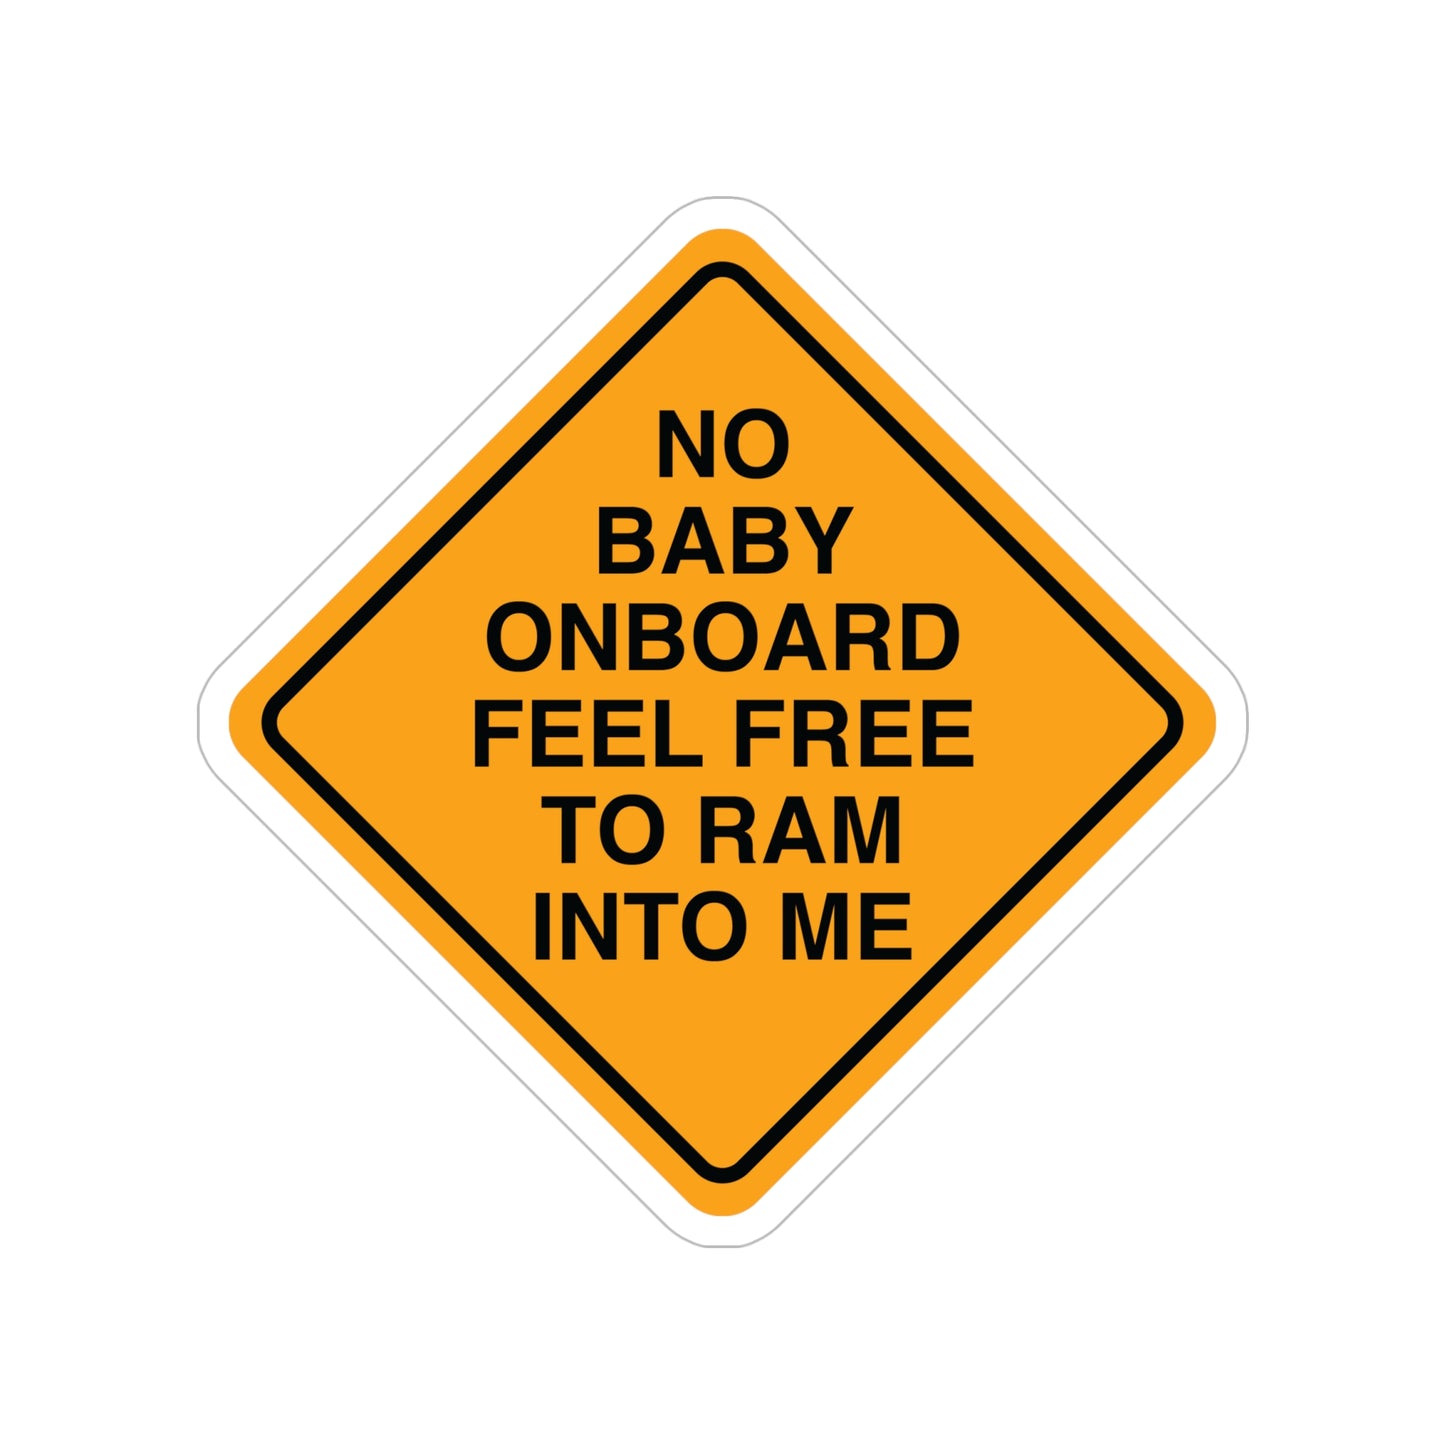 No Baby Onboard Feel Free To Ram Into Me. Funny Bumper Sticker